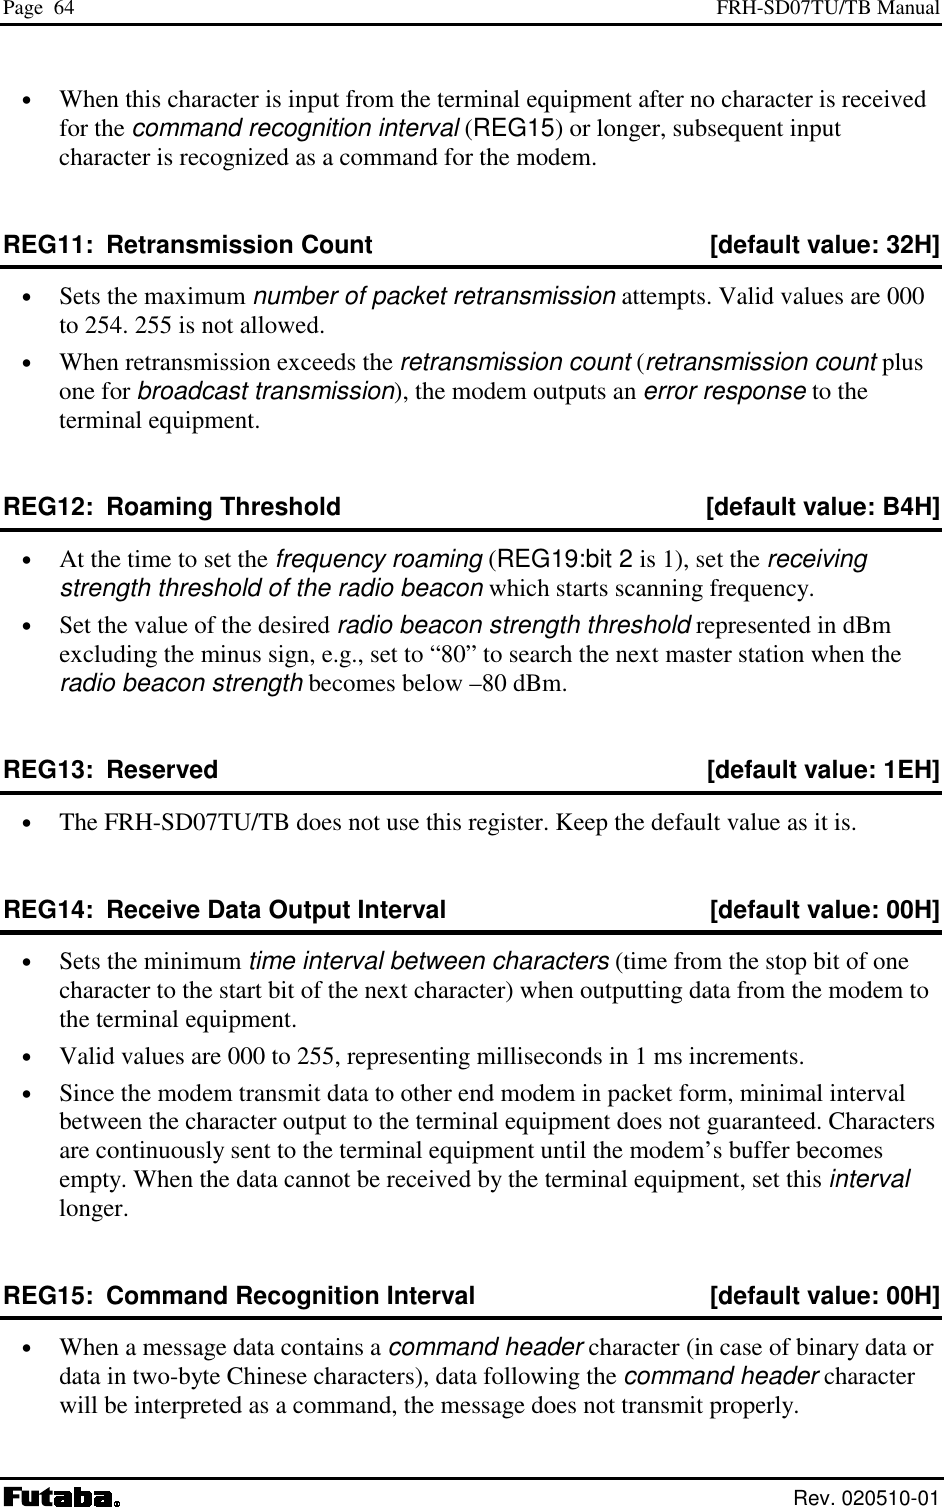 Page  64  FRH-SD07TU/TB Manual  Rev. 020510-01 •  When this character is input from the terminal equipment after no character is received for the command recognition interval (REG15) or longer, subsequent input character is recognized as a command for the modem. REG11:  Retransmission Count  [default value: 32H] •  Sets the maximum number of packet retransmission attempts. Valid values are 000 to 254. 255 is not allowed. •  When retransmission exceeds the retransmission count (retransmission count plus one for broadcast transmission), the modem outputs an error response to the terminal equipment. REG12:  Roaming Threshold  [default value: B4H] •  At the time to set the frequency roaming (REG19:bit 2 is 1), set the receiving strength threshold of the radio beacon which starts scanning frequency. •  Set the value of the desired radio beacon strength threshold represented in dBm excluding the minus sign, e.g., set to “80” to search the next master station when the radio beacon strength becomes below –80 dBm. REG13:  Reserved  [default value: 1EH] •  The FRH-SD07TU/TB does not use this register. Keep the default value as it is. REG14:  Receive Data Output Interval  [default value: 00H] •  Sets the minimum time interval between characters (time from the stop bit of one character to the start bit of the next character) when outputting data from the modem to the terminal equipment. •  Valid values are 000 to 255, representing milliseconds in 1 ms increments. •  Since the modem transmit data to other end modem in packet form, minimal interval between the character output to the terminal equipment does not guaranteed. Characters are continuously sent to the terminal equipment until the modem’s buffer becomes empty. When the data cannot be received by the terminal equipment, set this interval longer. REG15:  Command Recognition Interval  [default value: 00H] •  When a message data contains a command header character (in case of binary data or data in two-byte Chinese characters), data following the command header character will be interpreted as a command, the message does not transmit properly. 